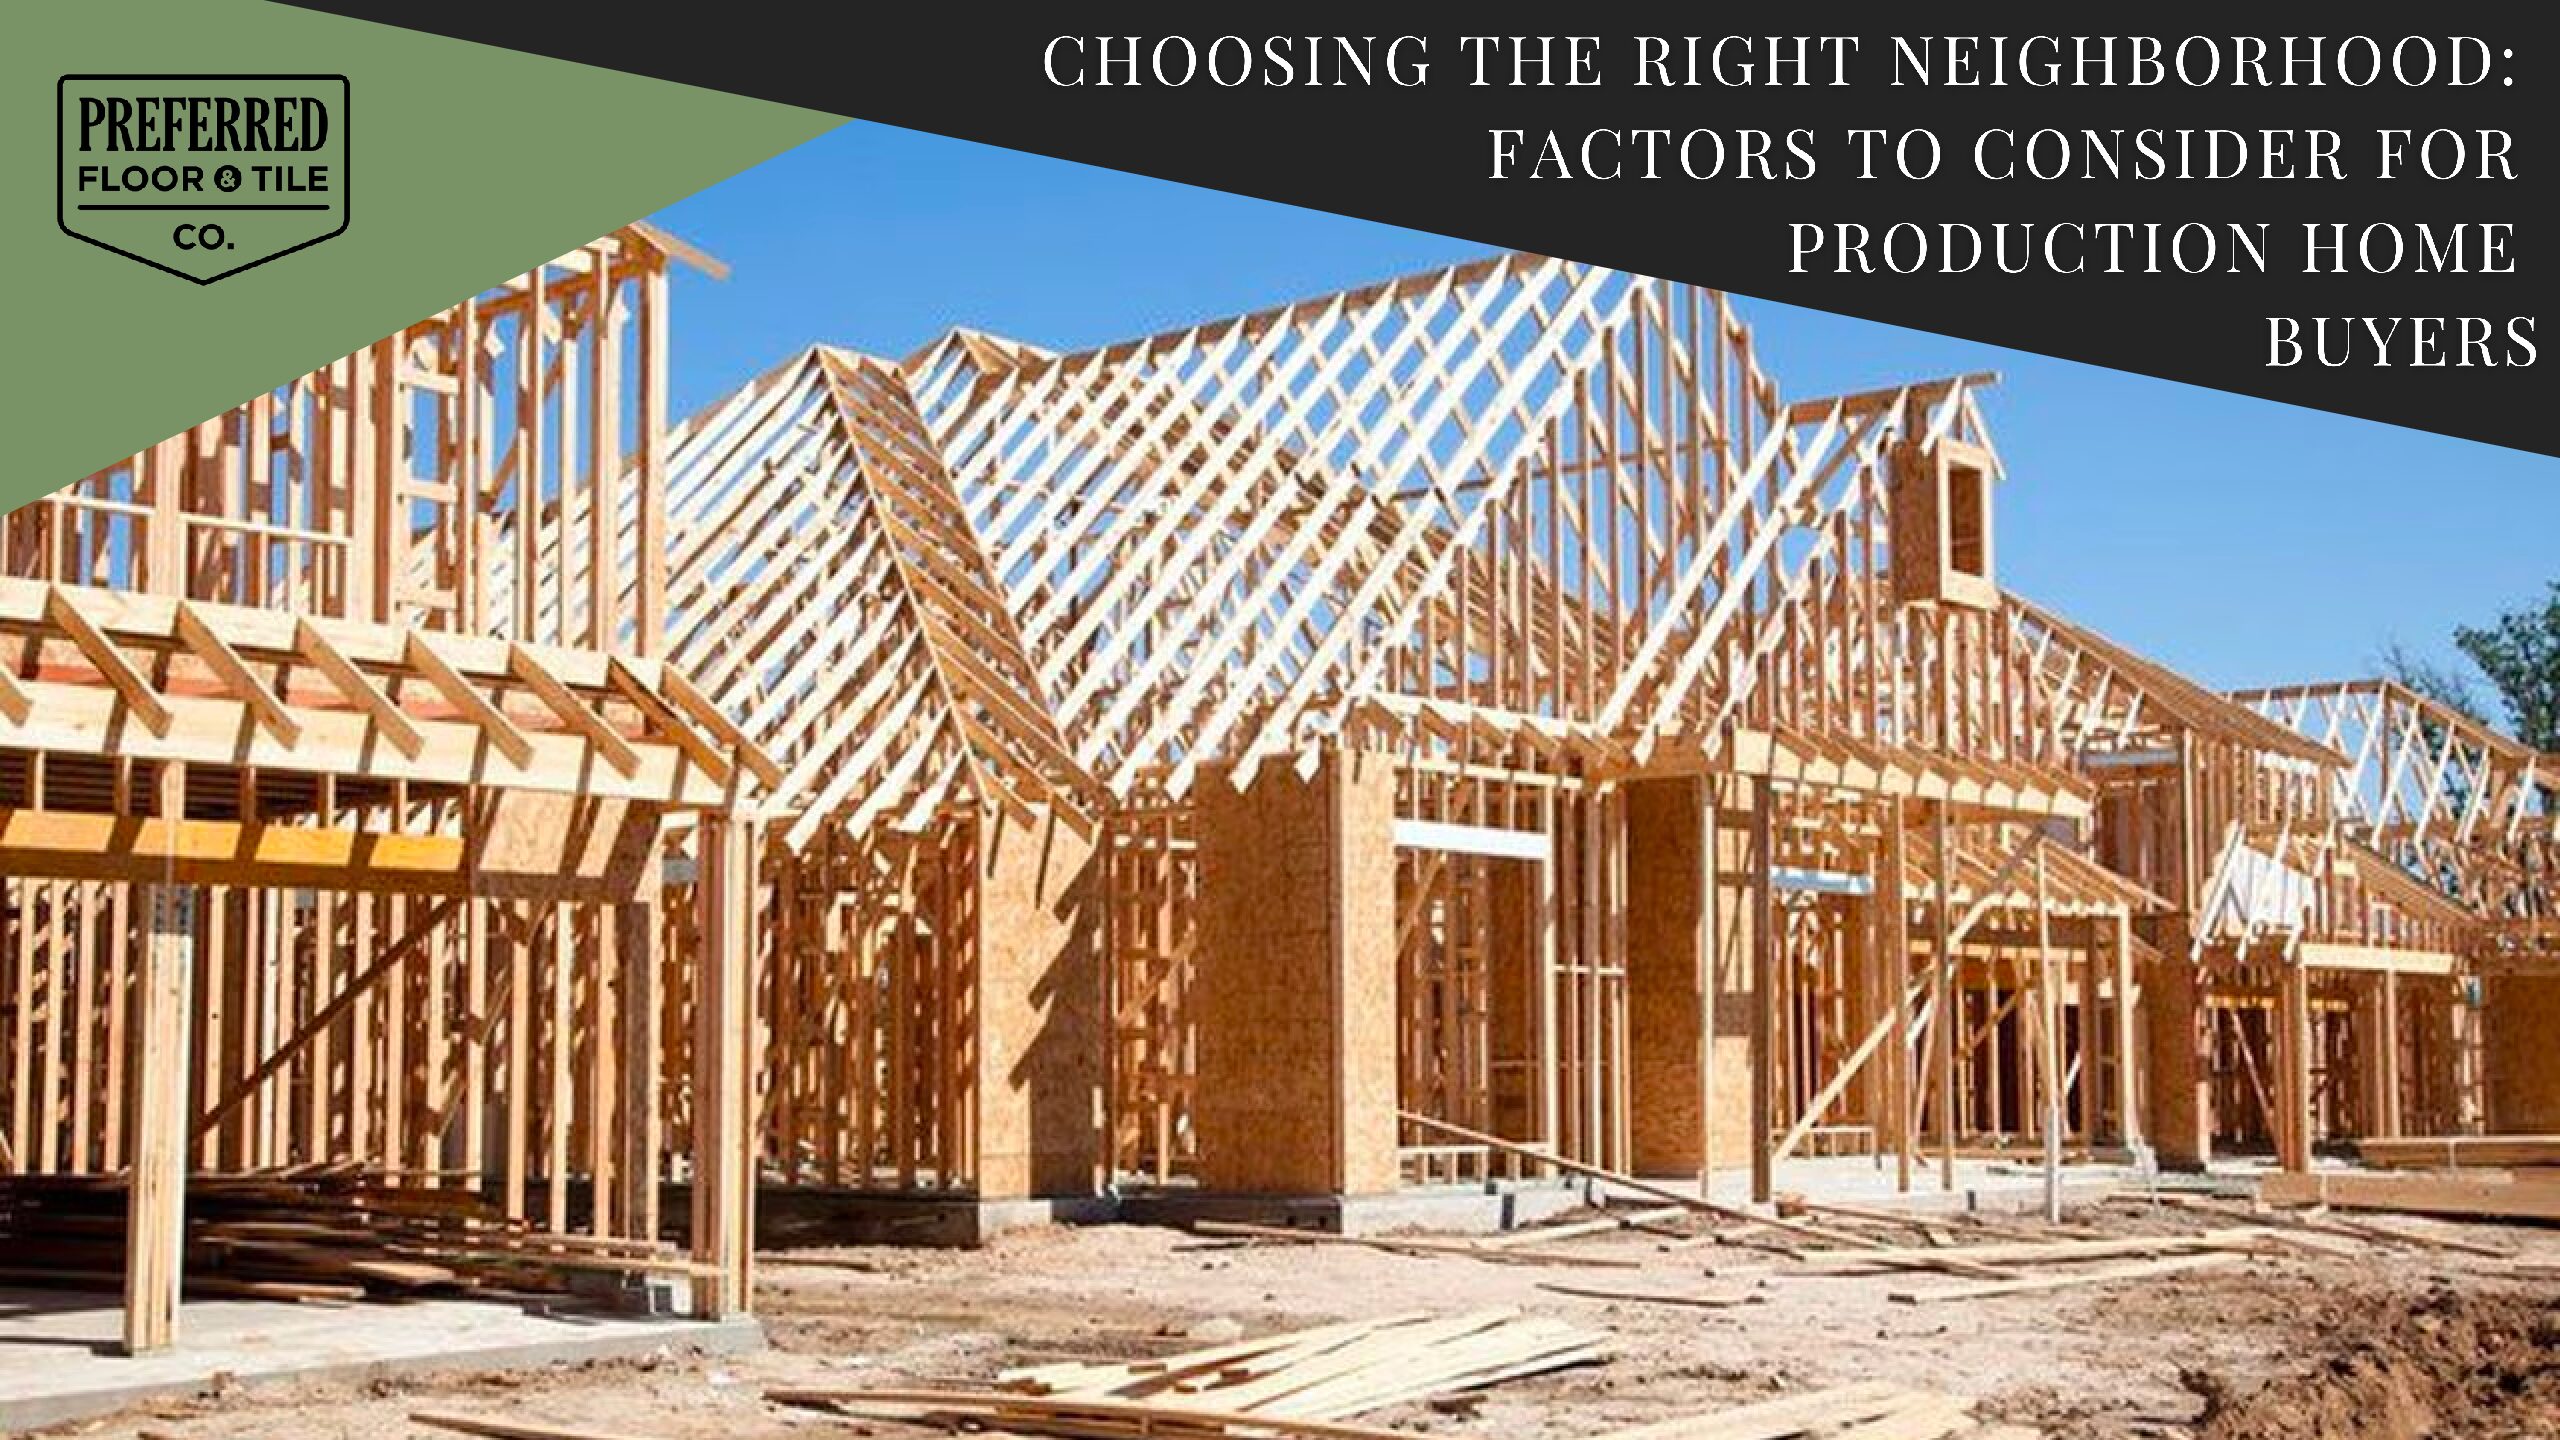 Choosing the Right Neighborhood: Factors to Consider for Production Home Buyers